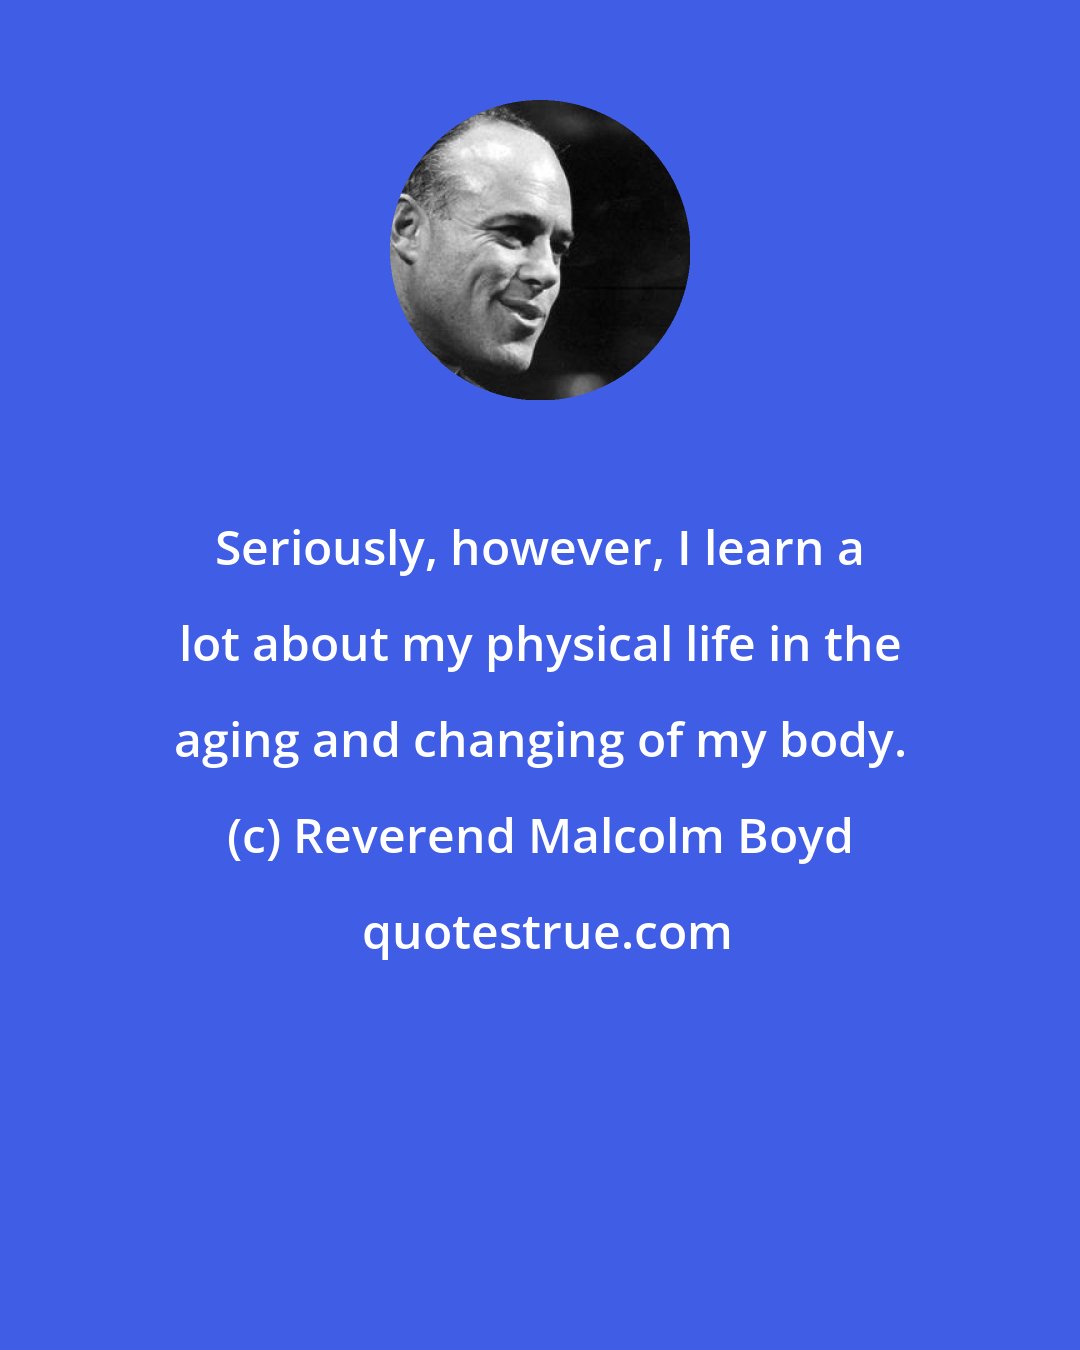 Reverend Malcolm Boyd: Seriously, however, I learn a lot about my physical life in the aging and changing of my body.